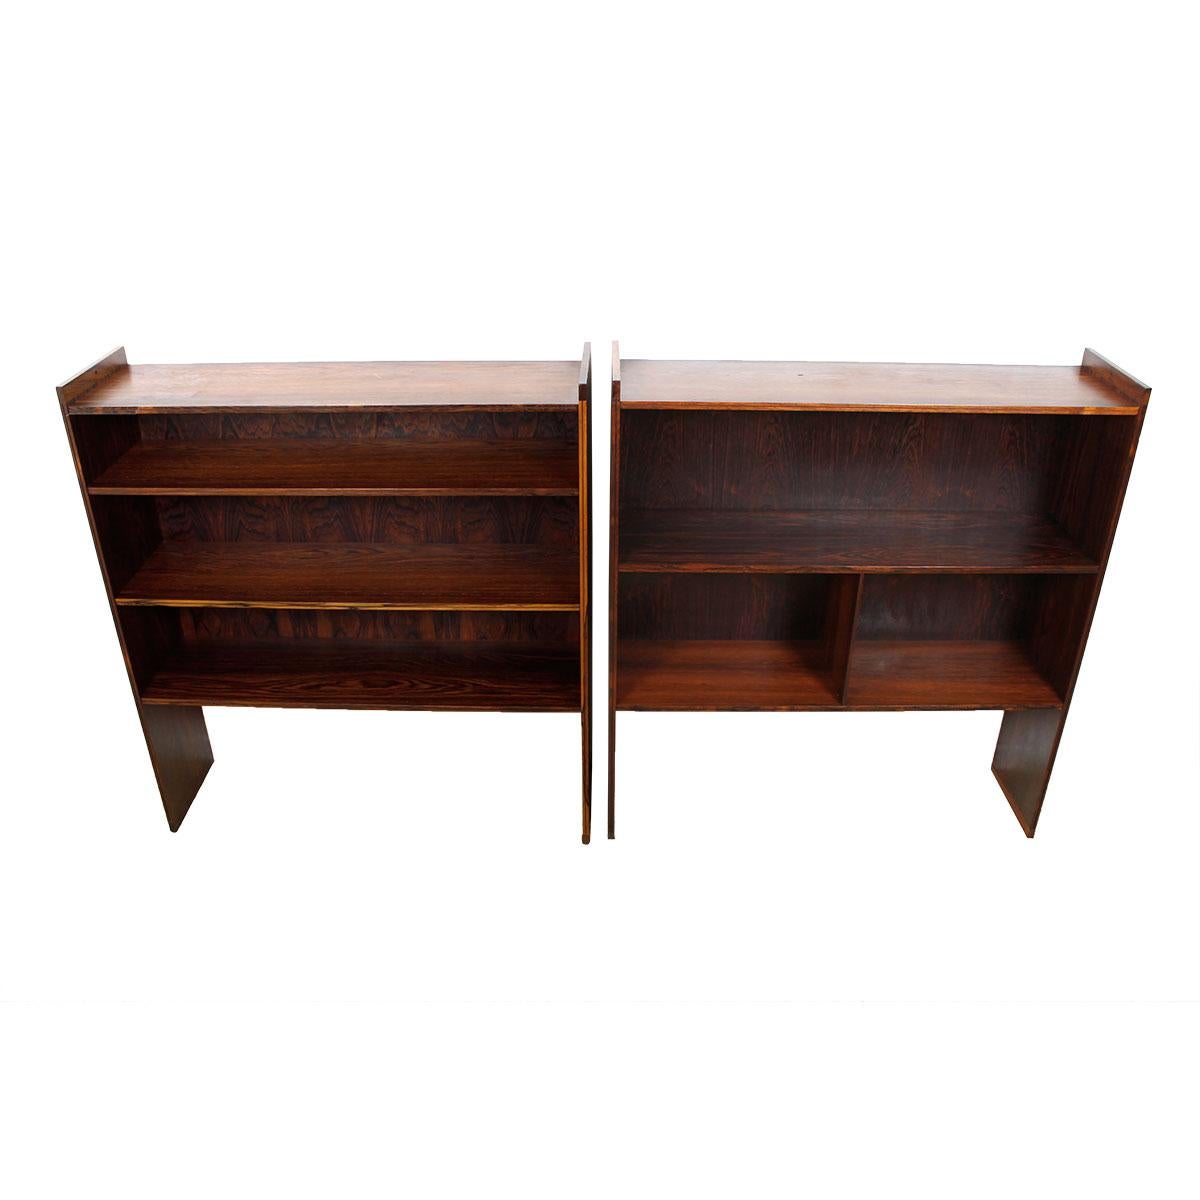 Royal Danish Embassy Slender-Edged Bookcase by Grete Jalk in Brazilian Rosewood For Sale 1